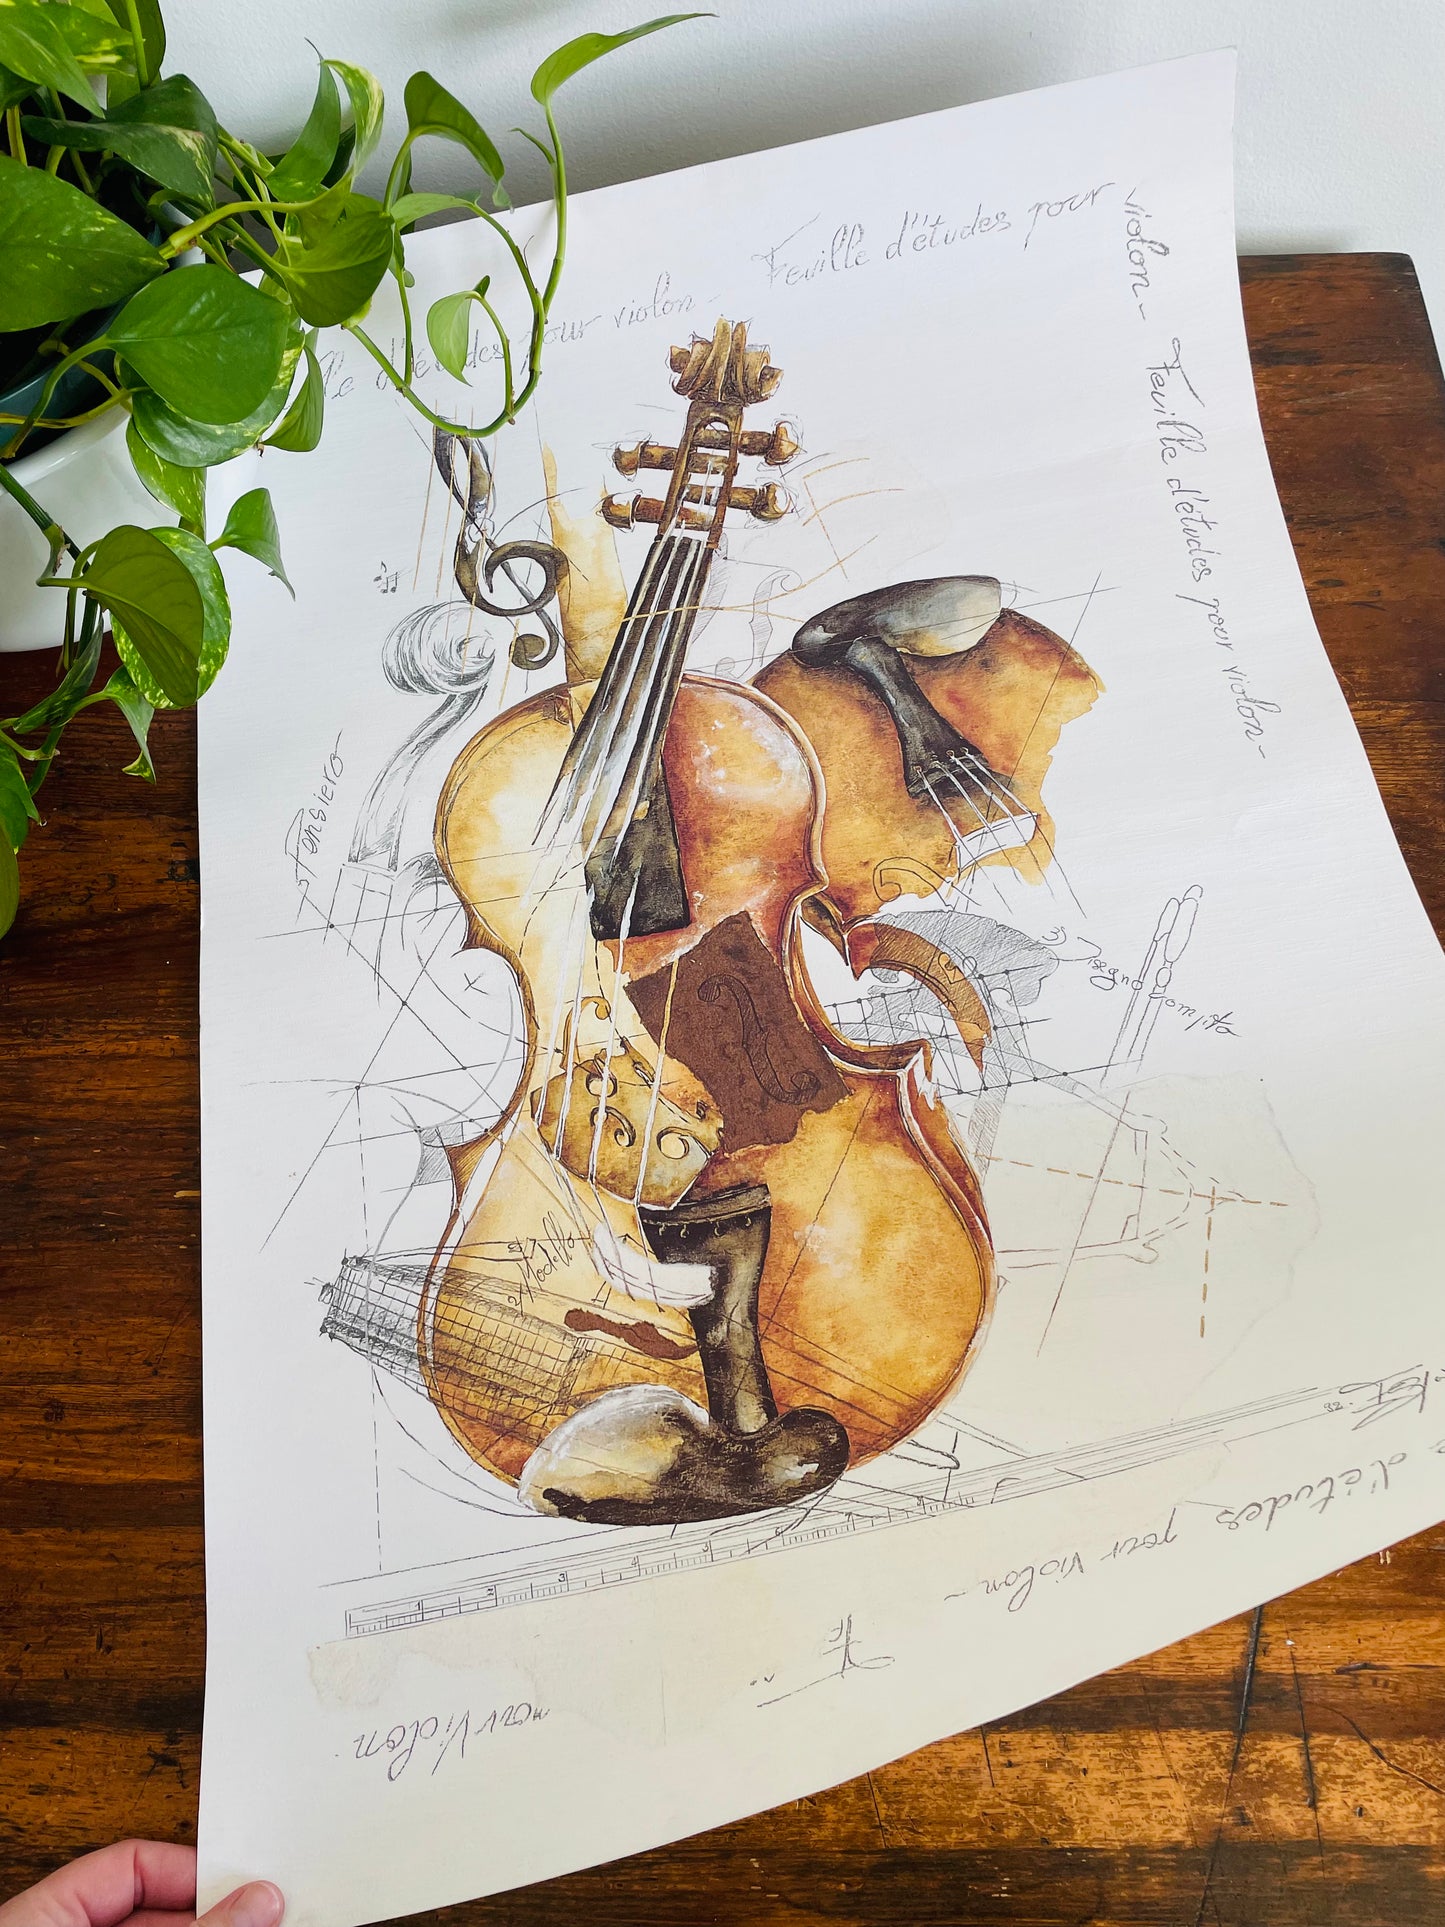 Musical Print Poster - Feuille d'études Pour Violin / Study Sheet for Violin *Please Read Shipping Instructions*